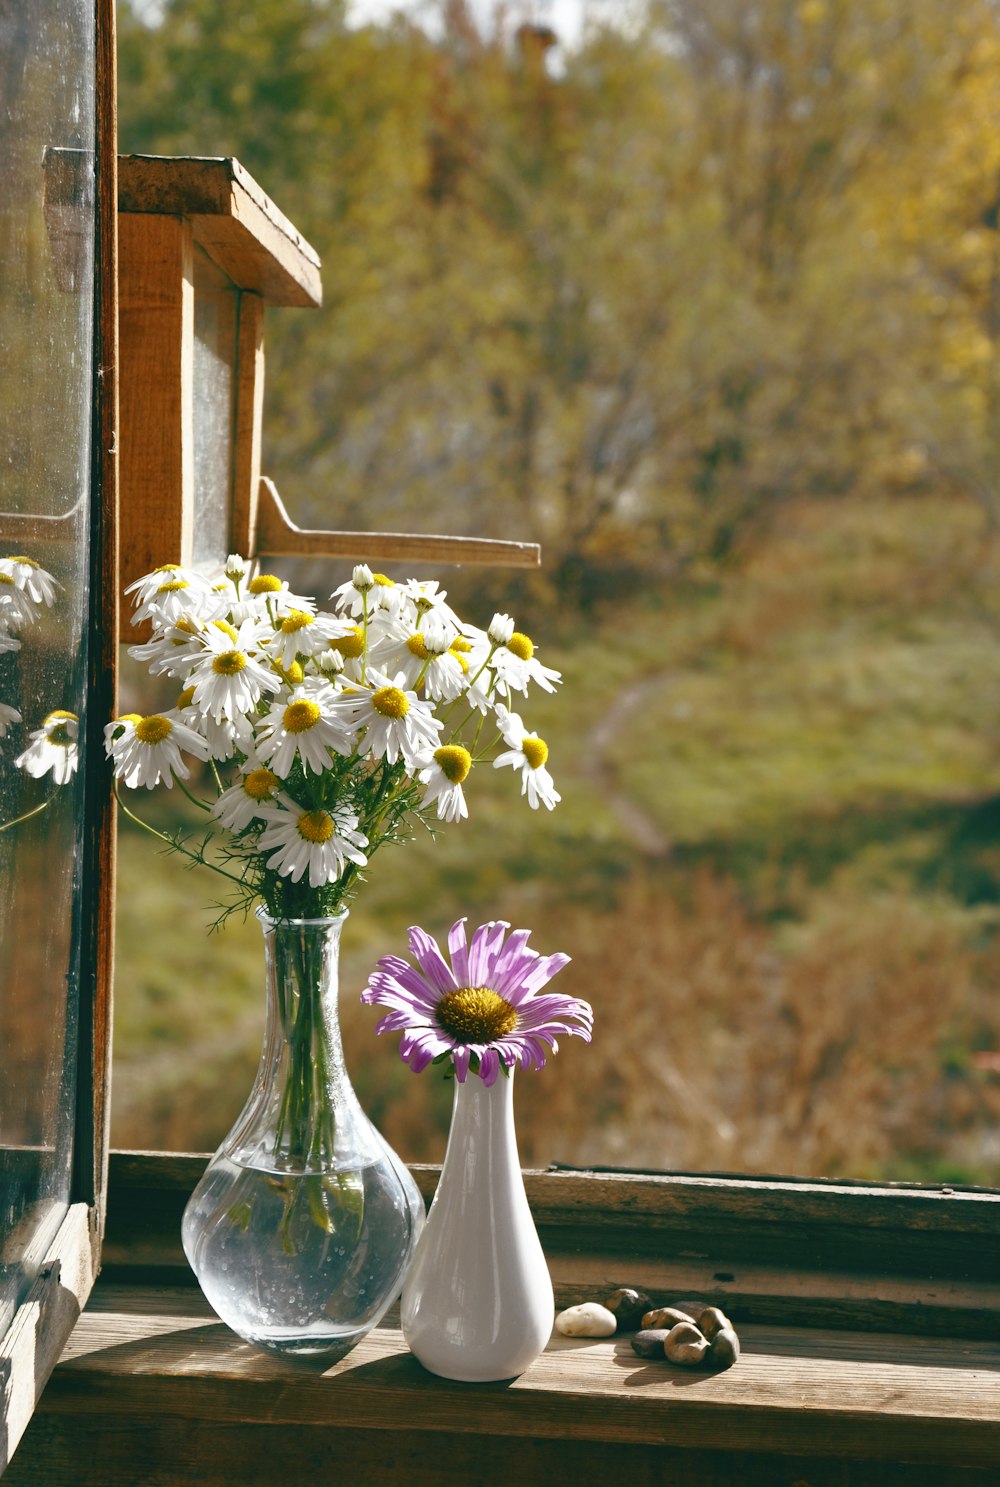 a window sill with two vases filled with flowers